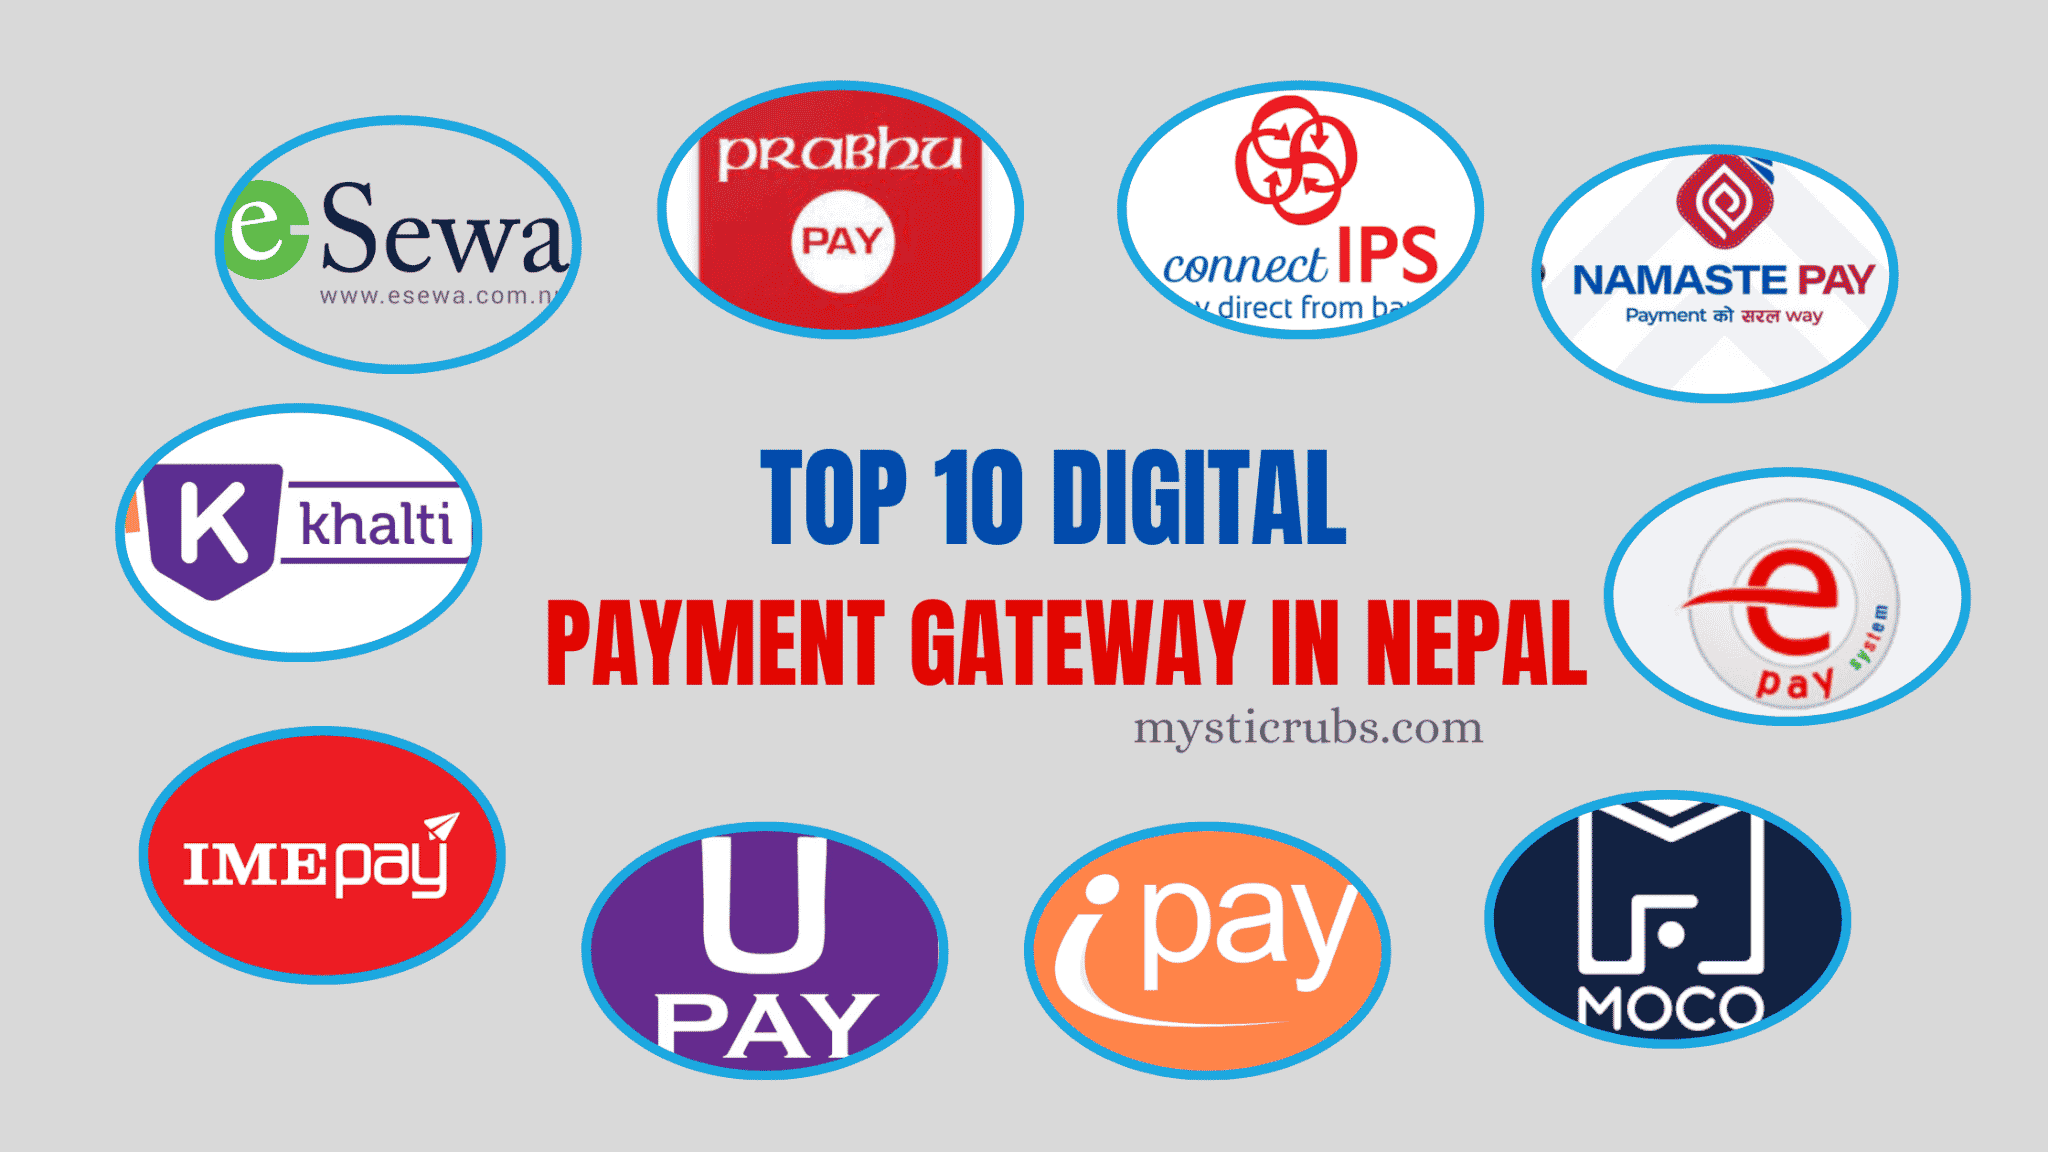 Which Online Payment Gateway is most popular in Nepal?